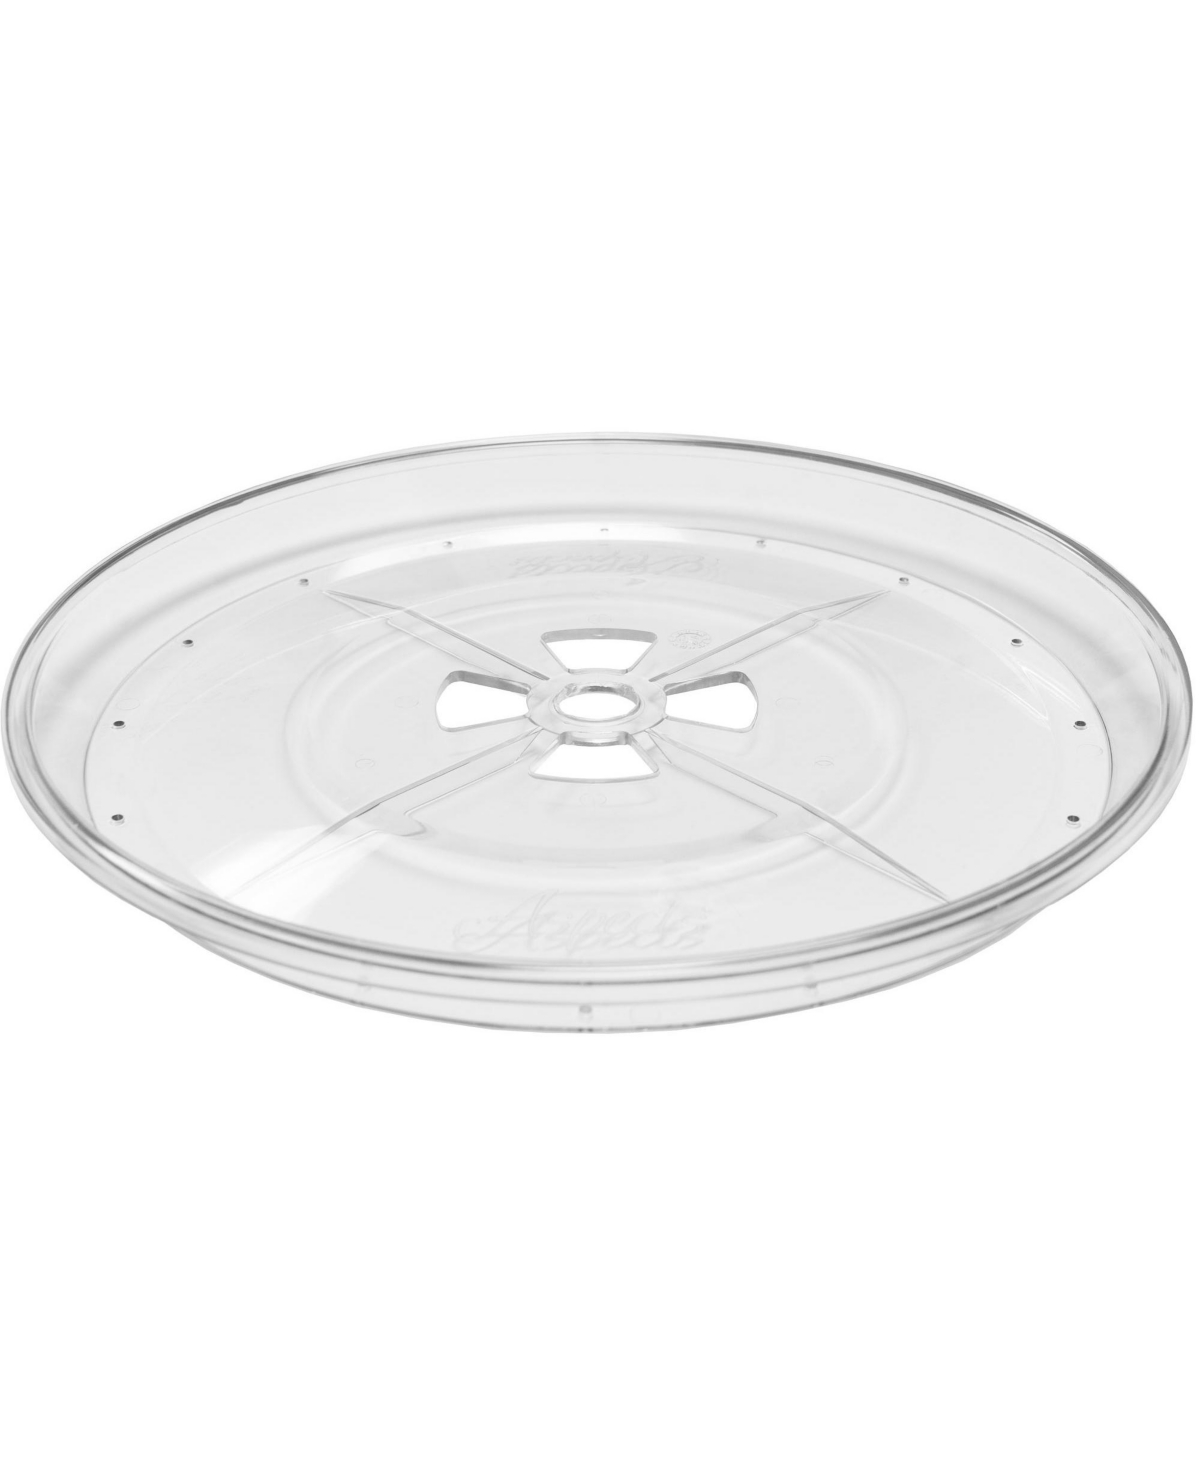 Quick Clean Bigfoot Seed Tray, 12 inch diameter - Multi